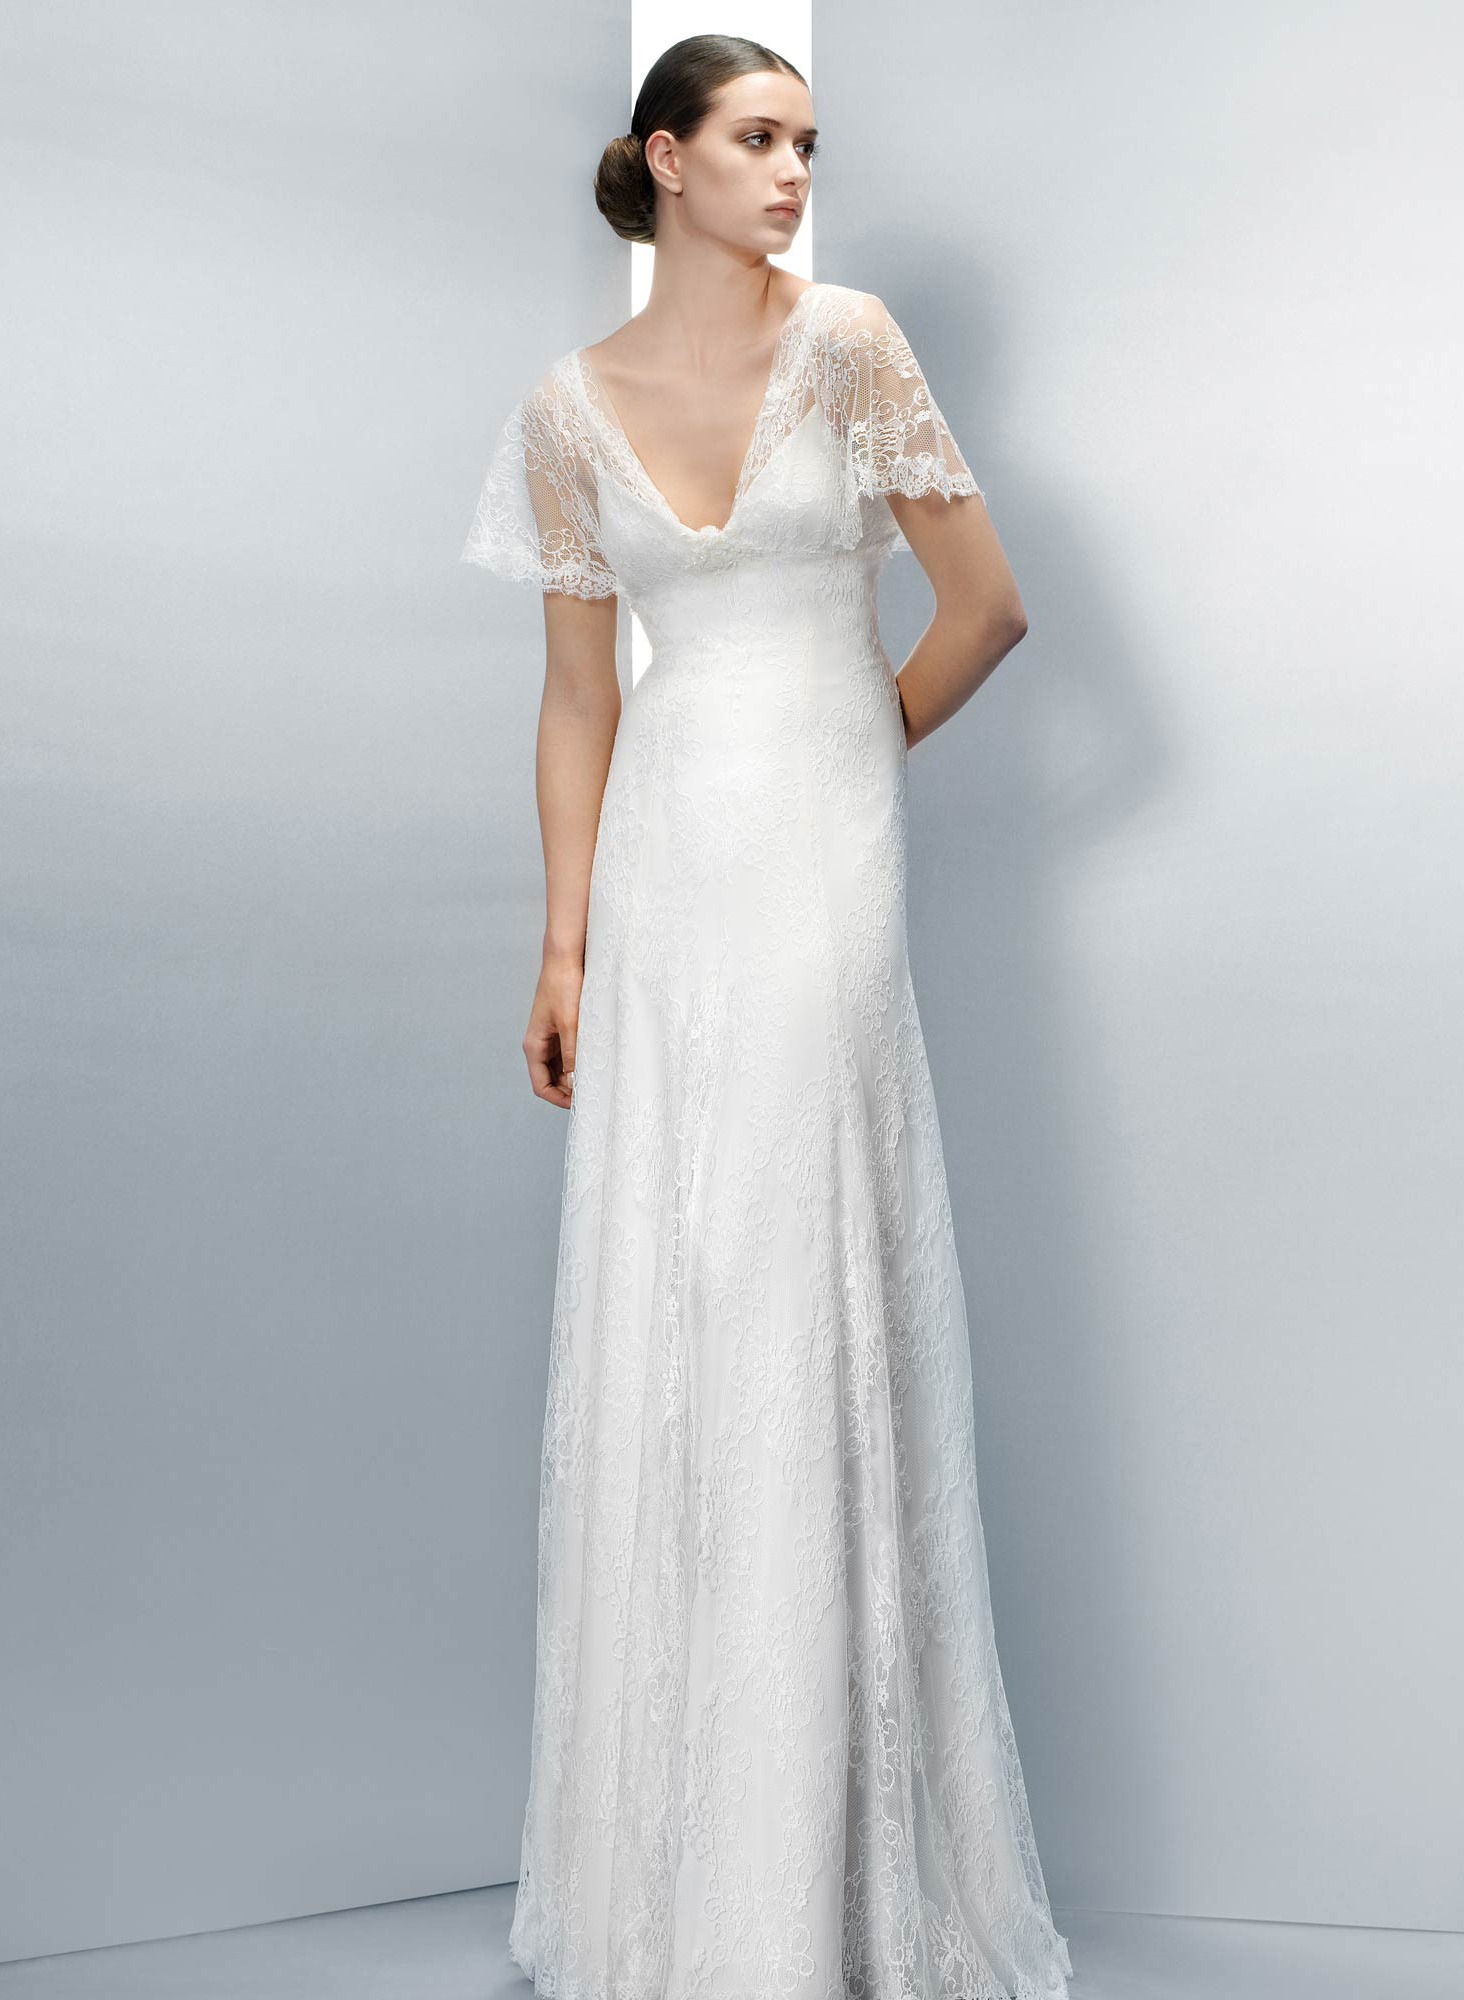 Jesus Peiro Wedding Dress 2045 1940s inspired Lace gown